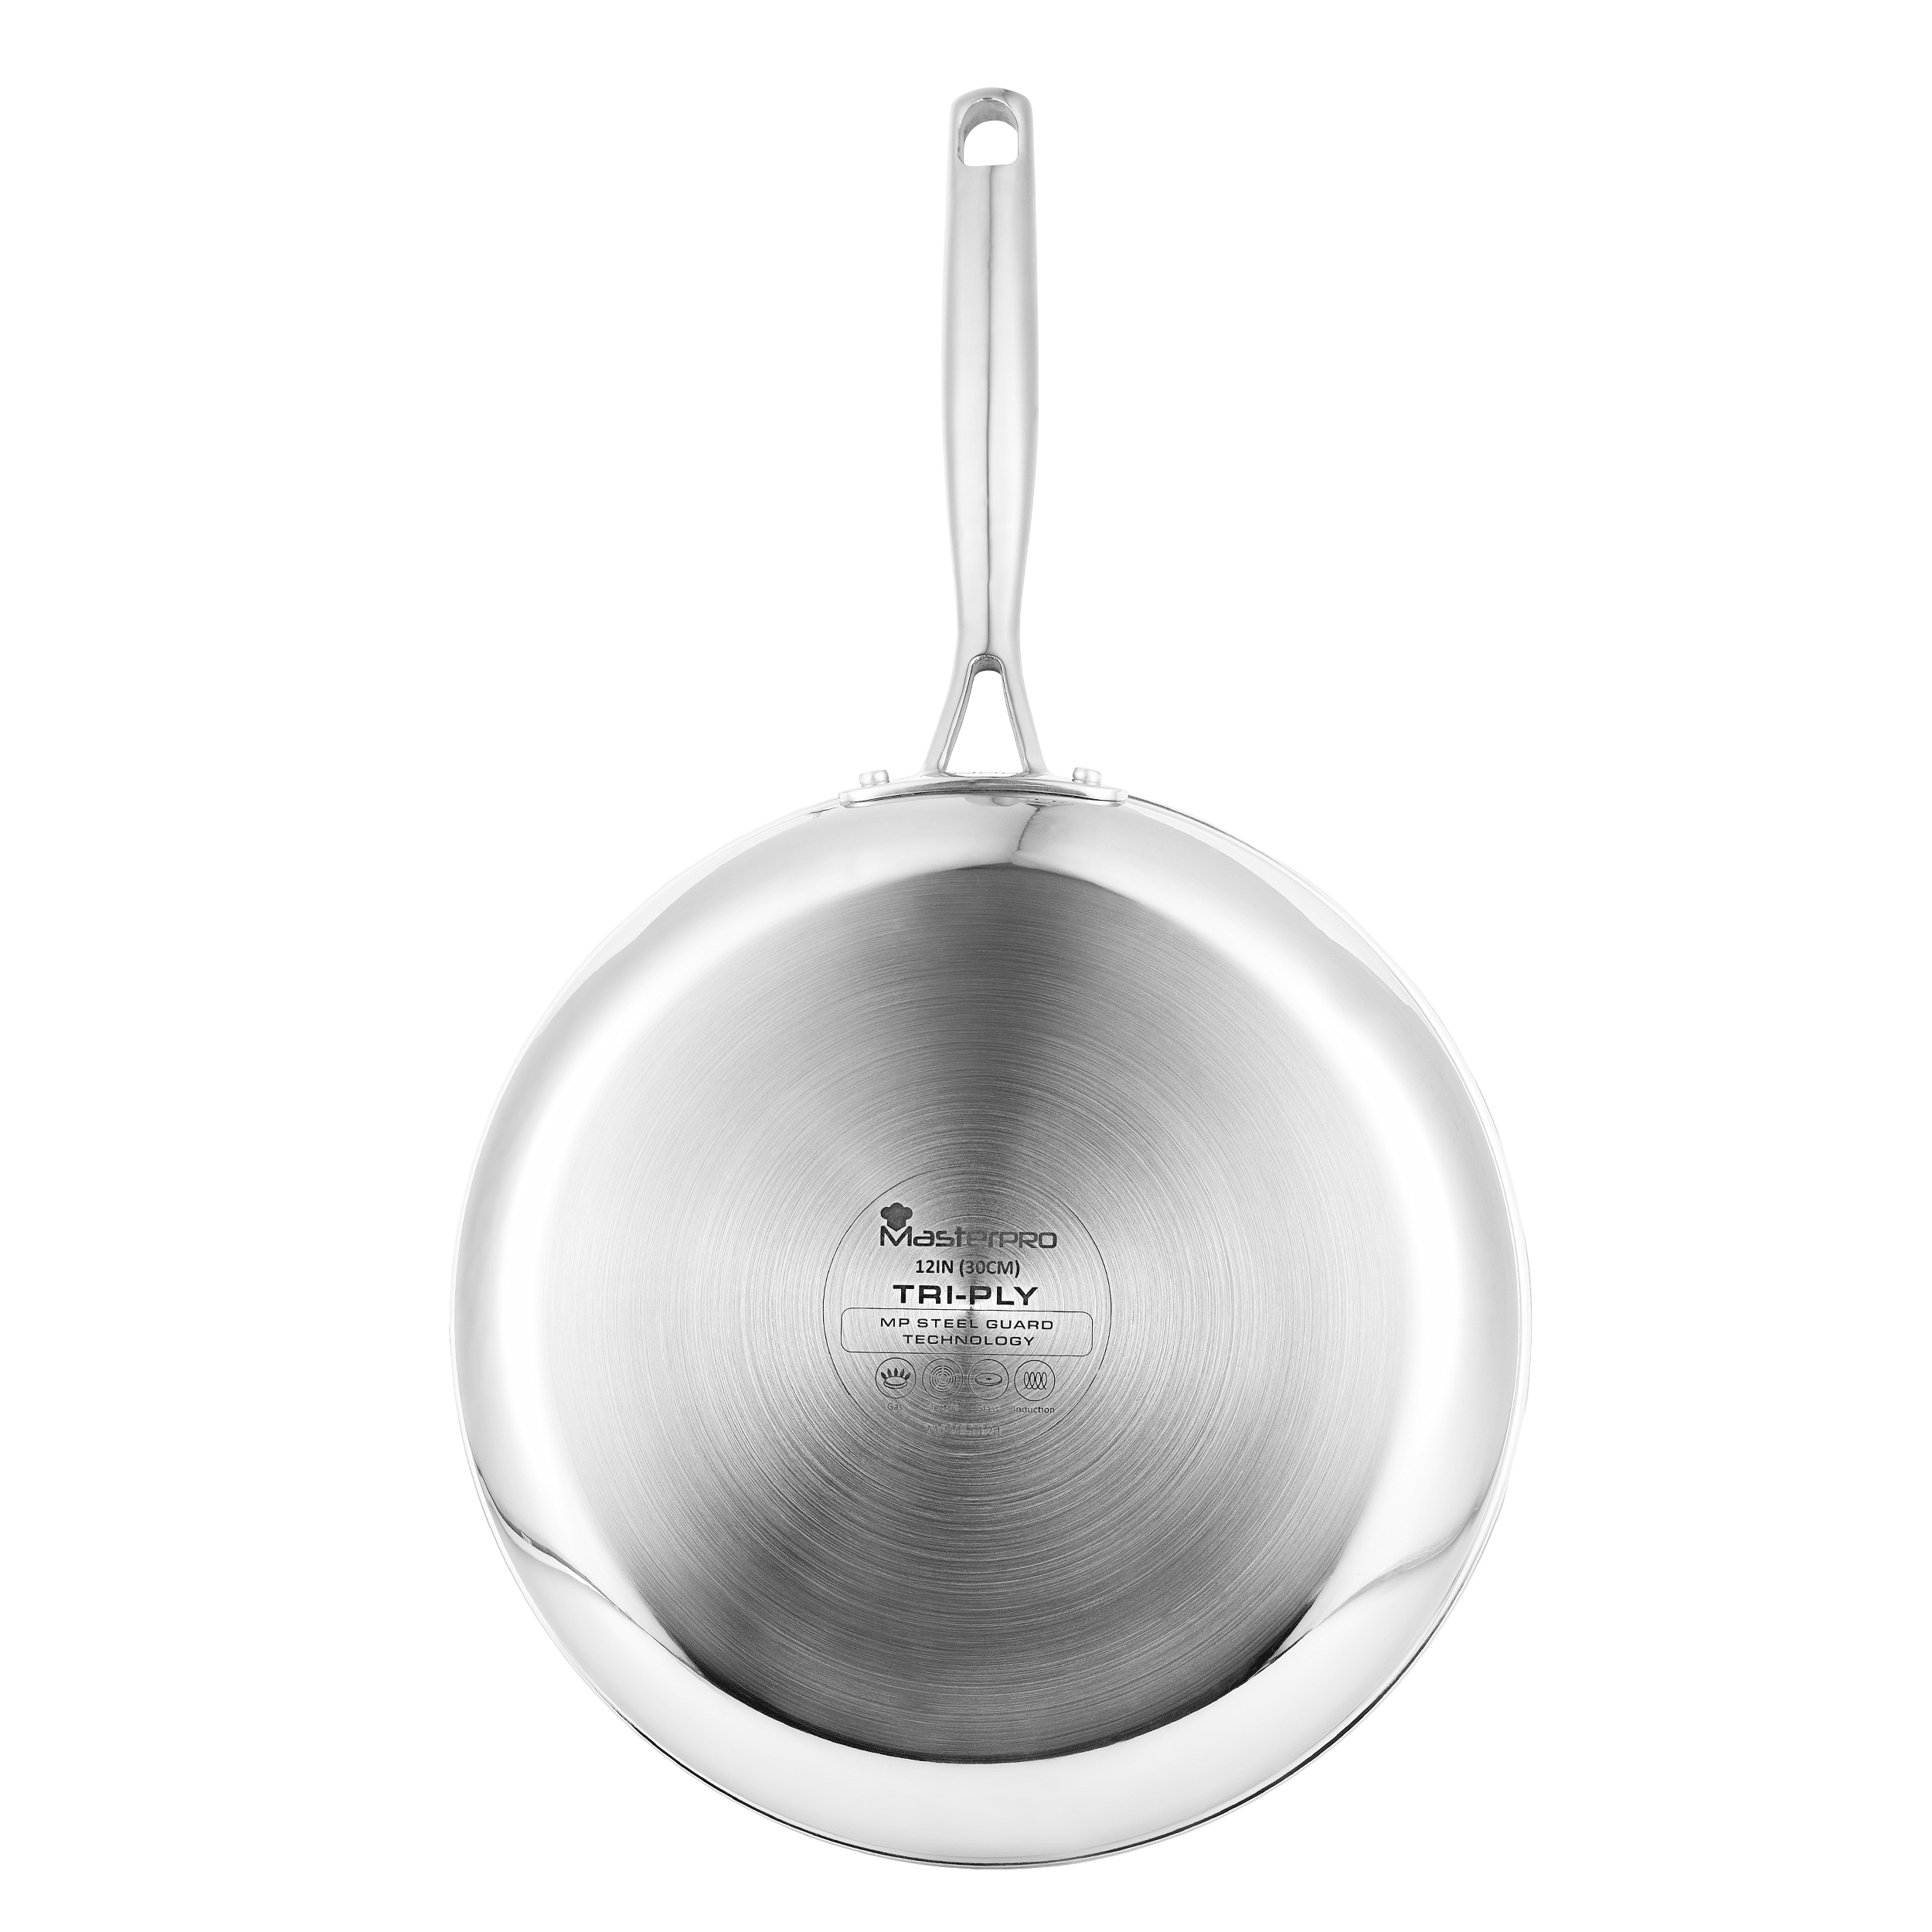 MasterPRO Gastro Titanium Collection Durable Cast Aluminum 12.5-inch Fry Pan with Tempered Glass Lid - 12.5 inch - Brown